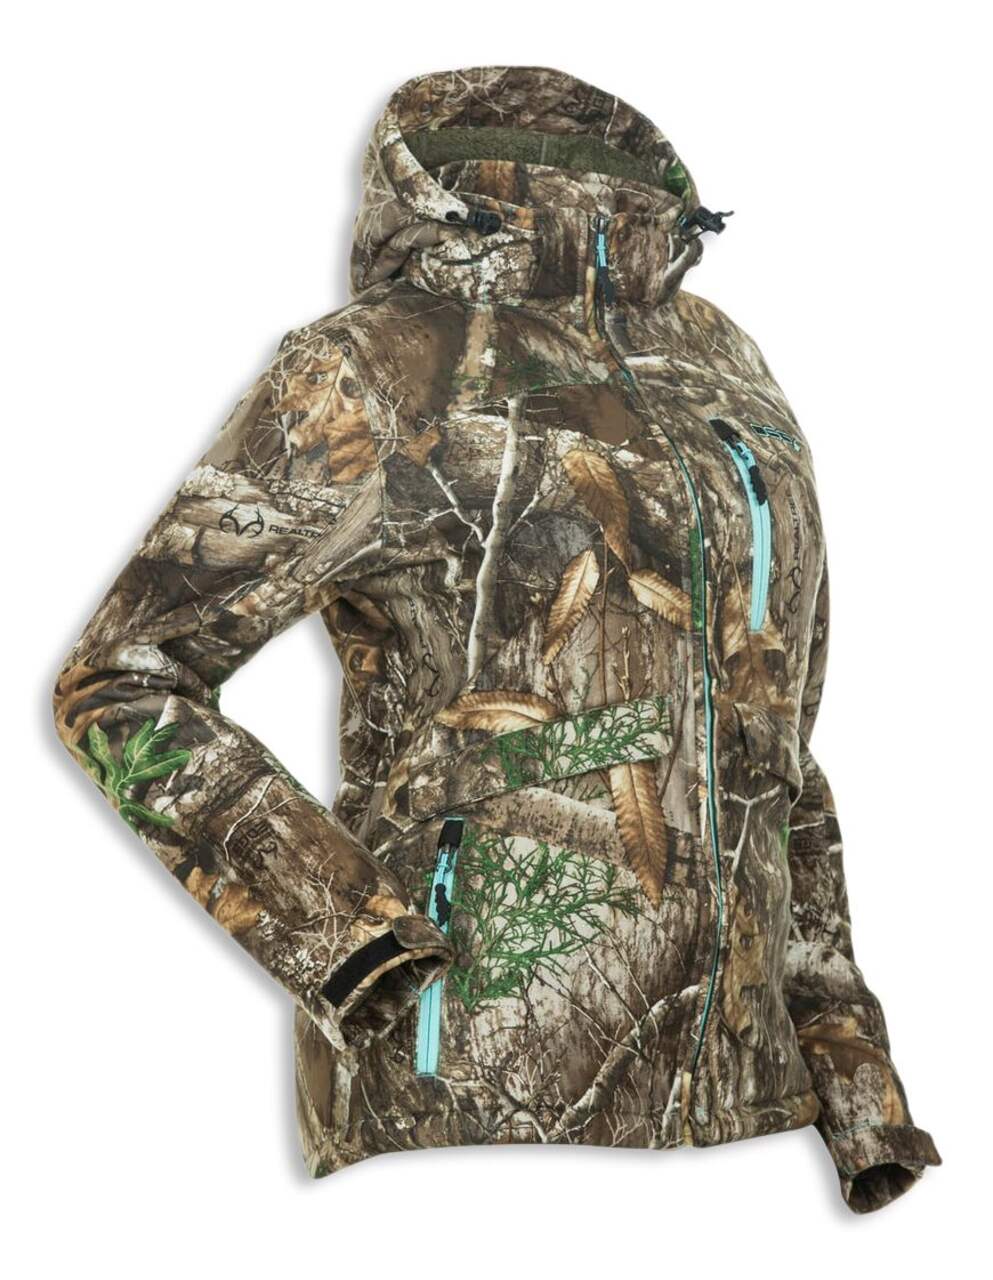  DSG Outerwear Addie Hunting Jacket for Women - 120g Insulated,  DWR Waterproof Tricot, with Wrist Gaiters and Removable Hood (Edge, Medium)  : Clothing, Shoes & Jewelry